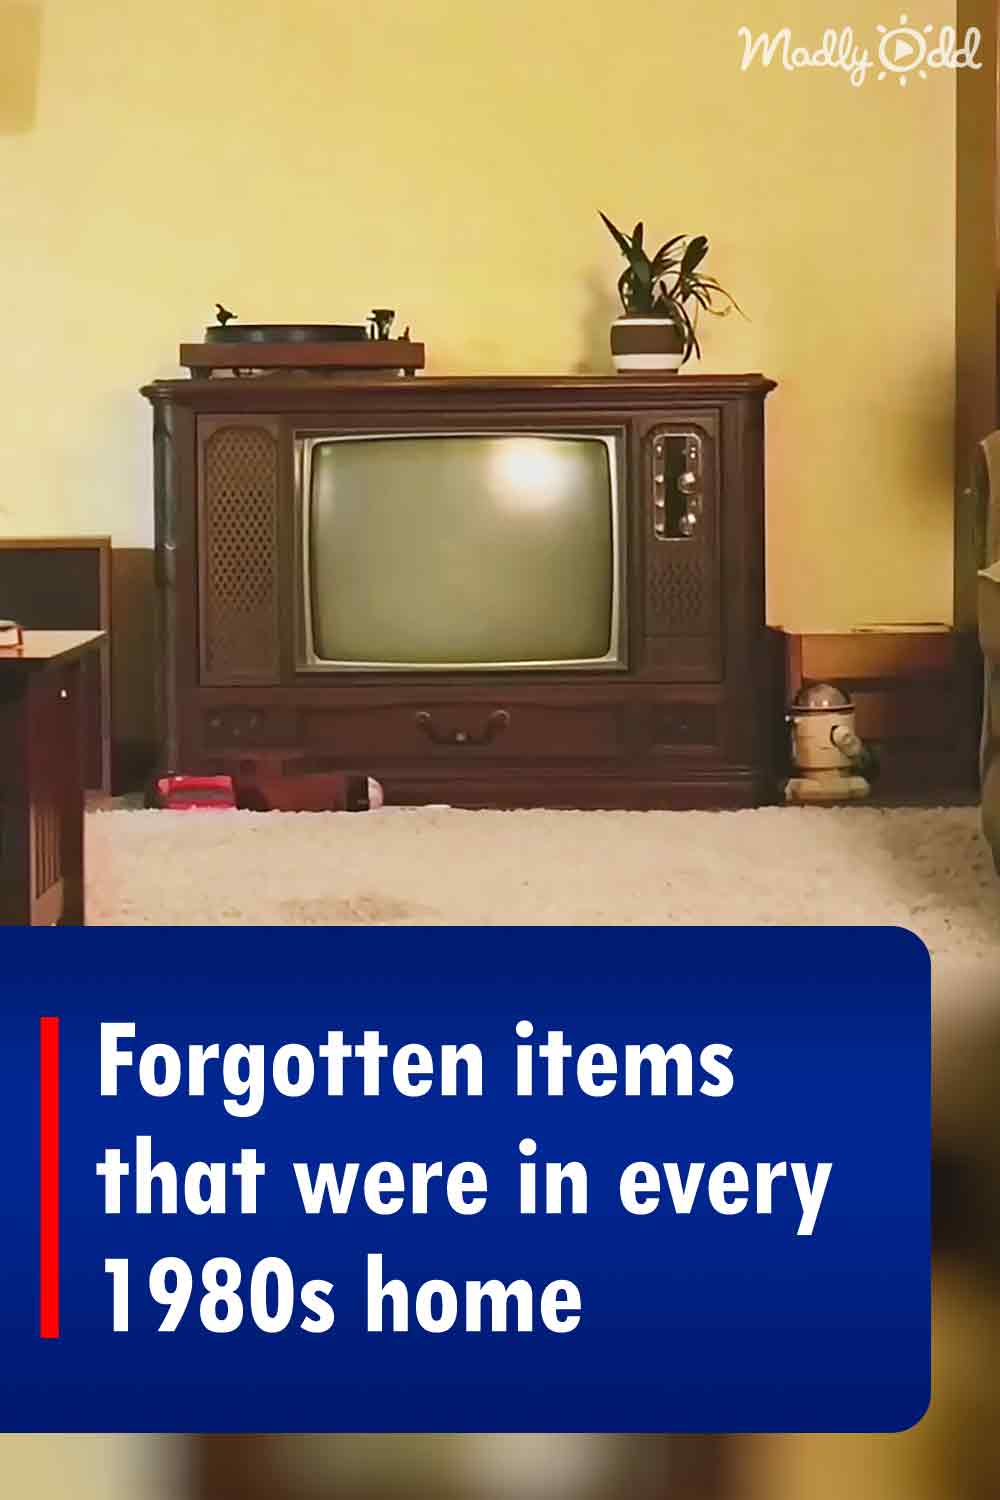 Forgotten items that were in every 1980s home